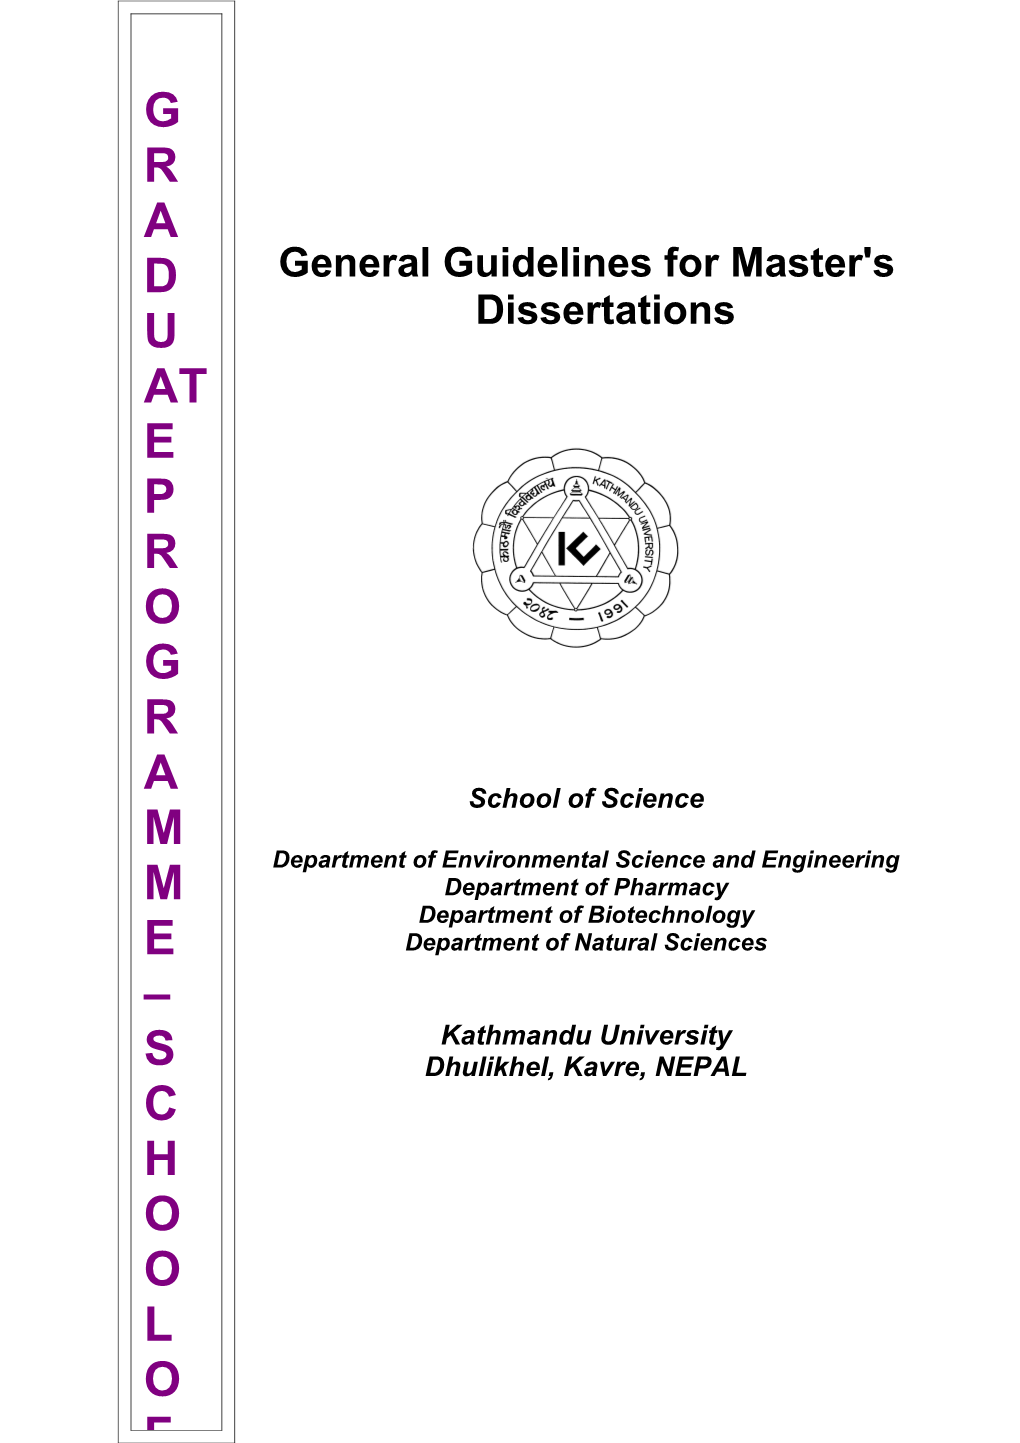 General Guidelines for Master's Theses